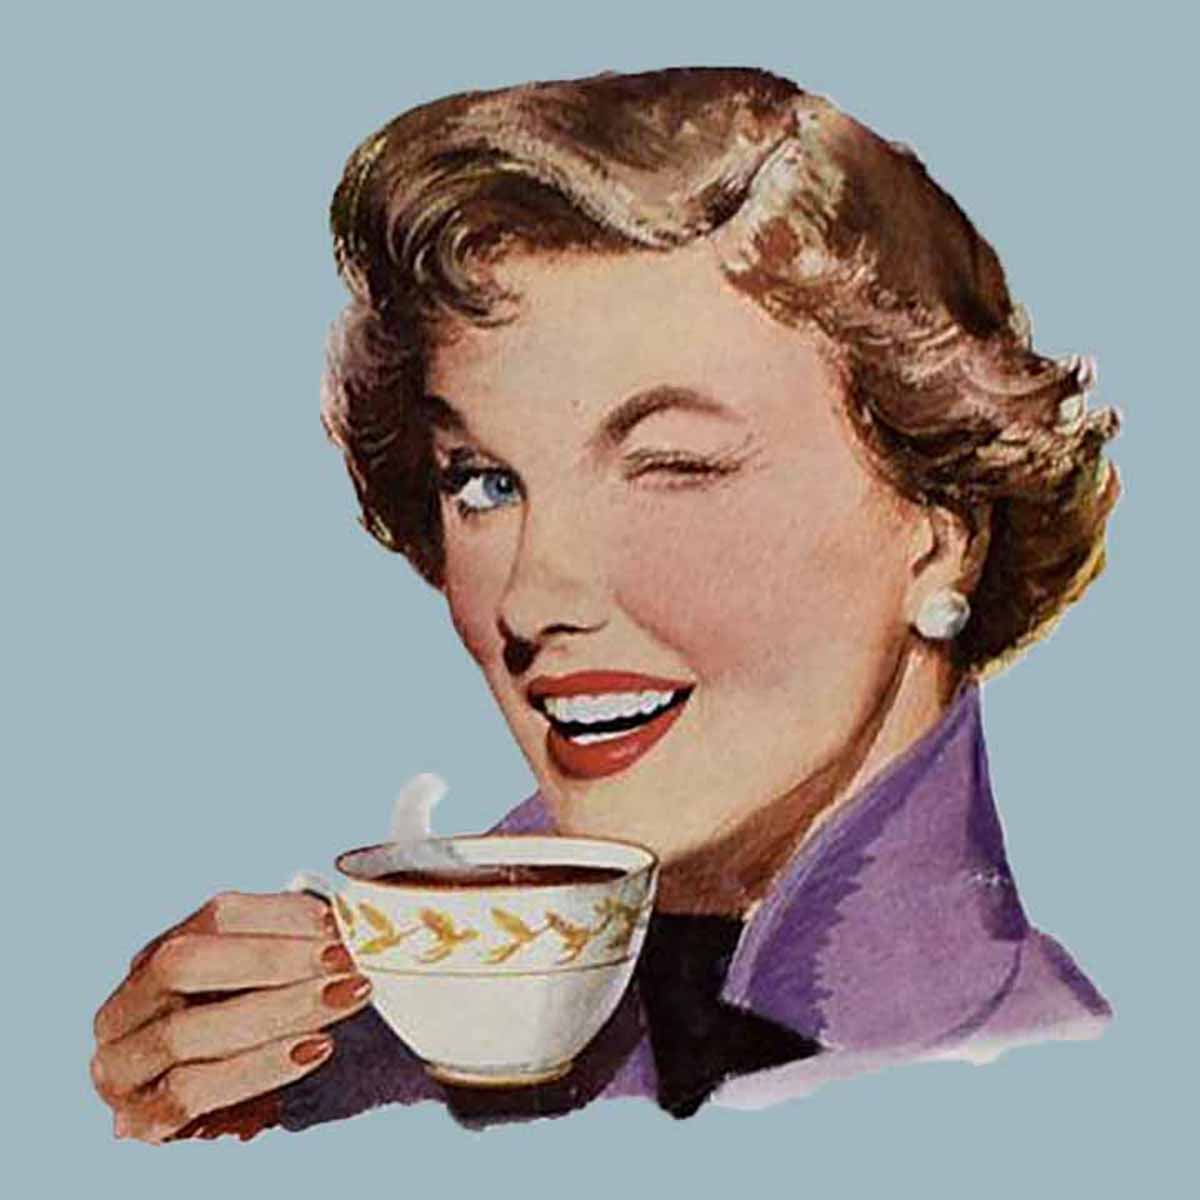 an illustration of a 1950s housewife winking.